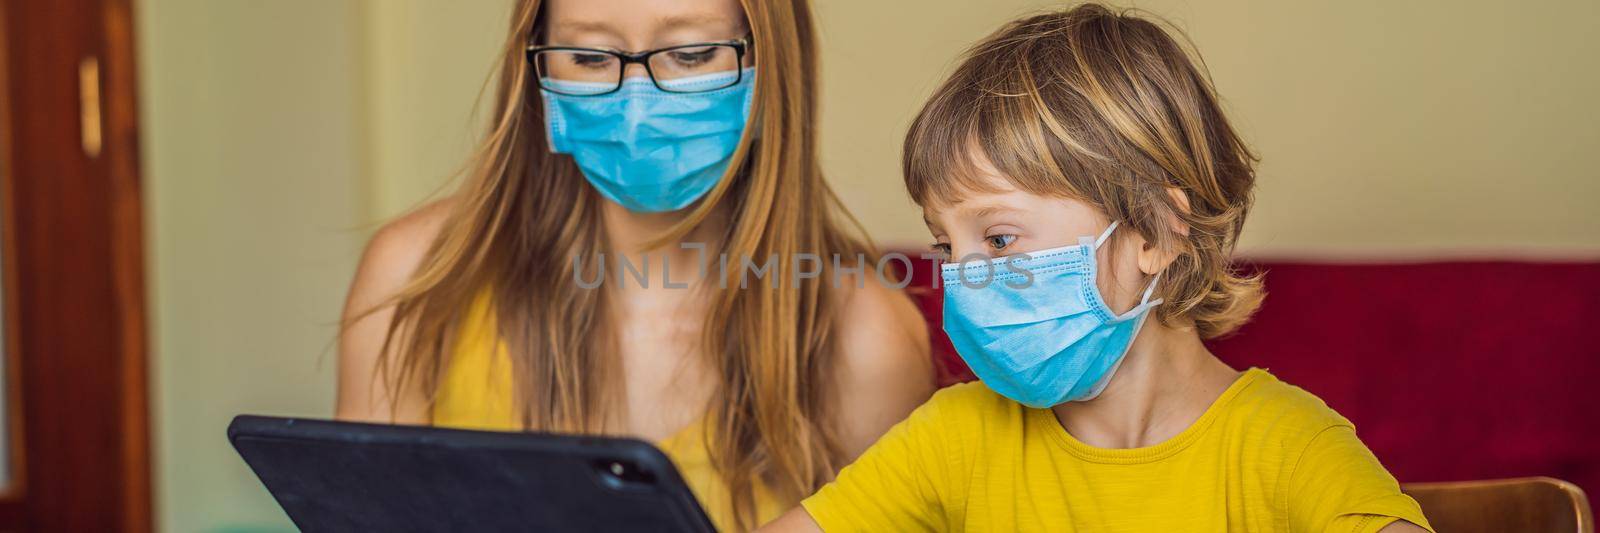 Boy studying online at home using a tablet. Mom helps him learn. Mom and son in medical masks to protect against coronovirus. Studying during quarantine. Global pandemic covid19 virus BANNER, LONG by galitskaya